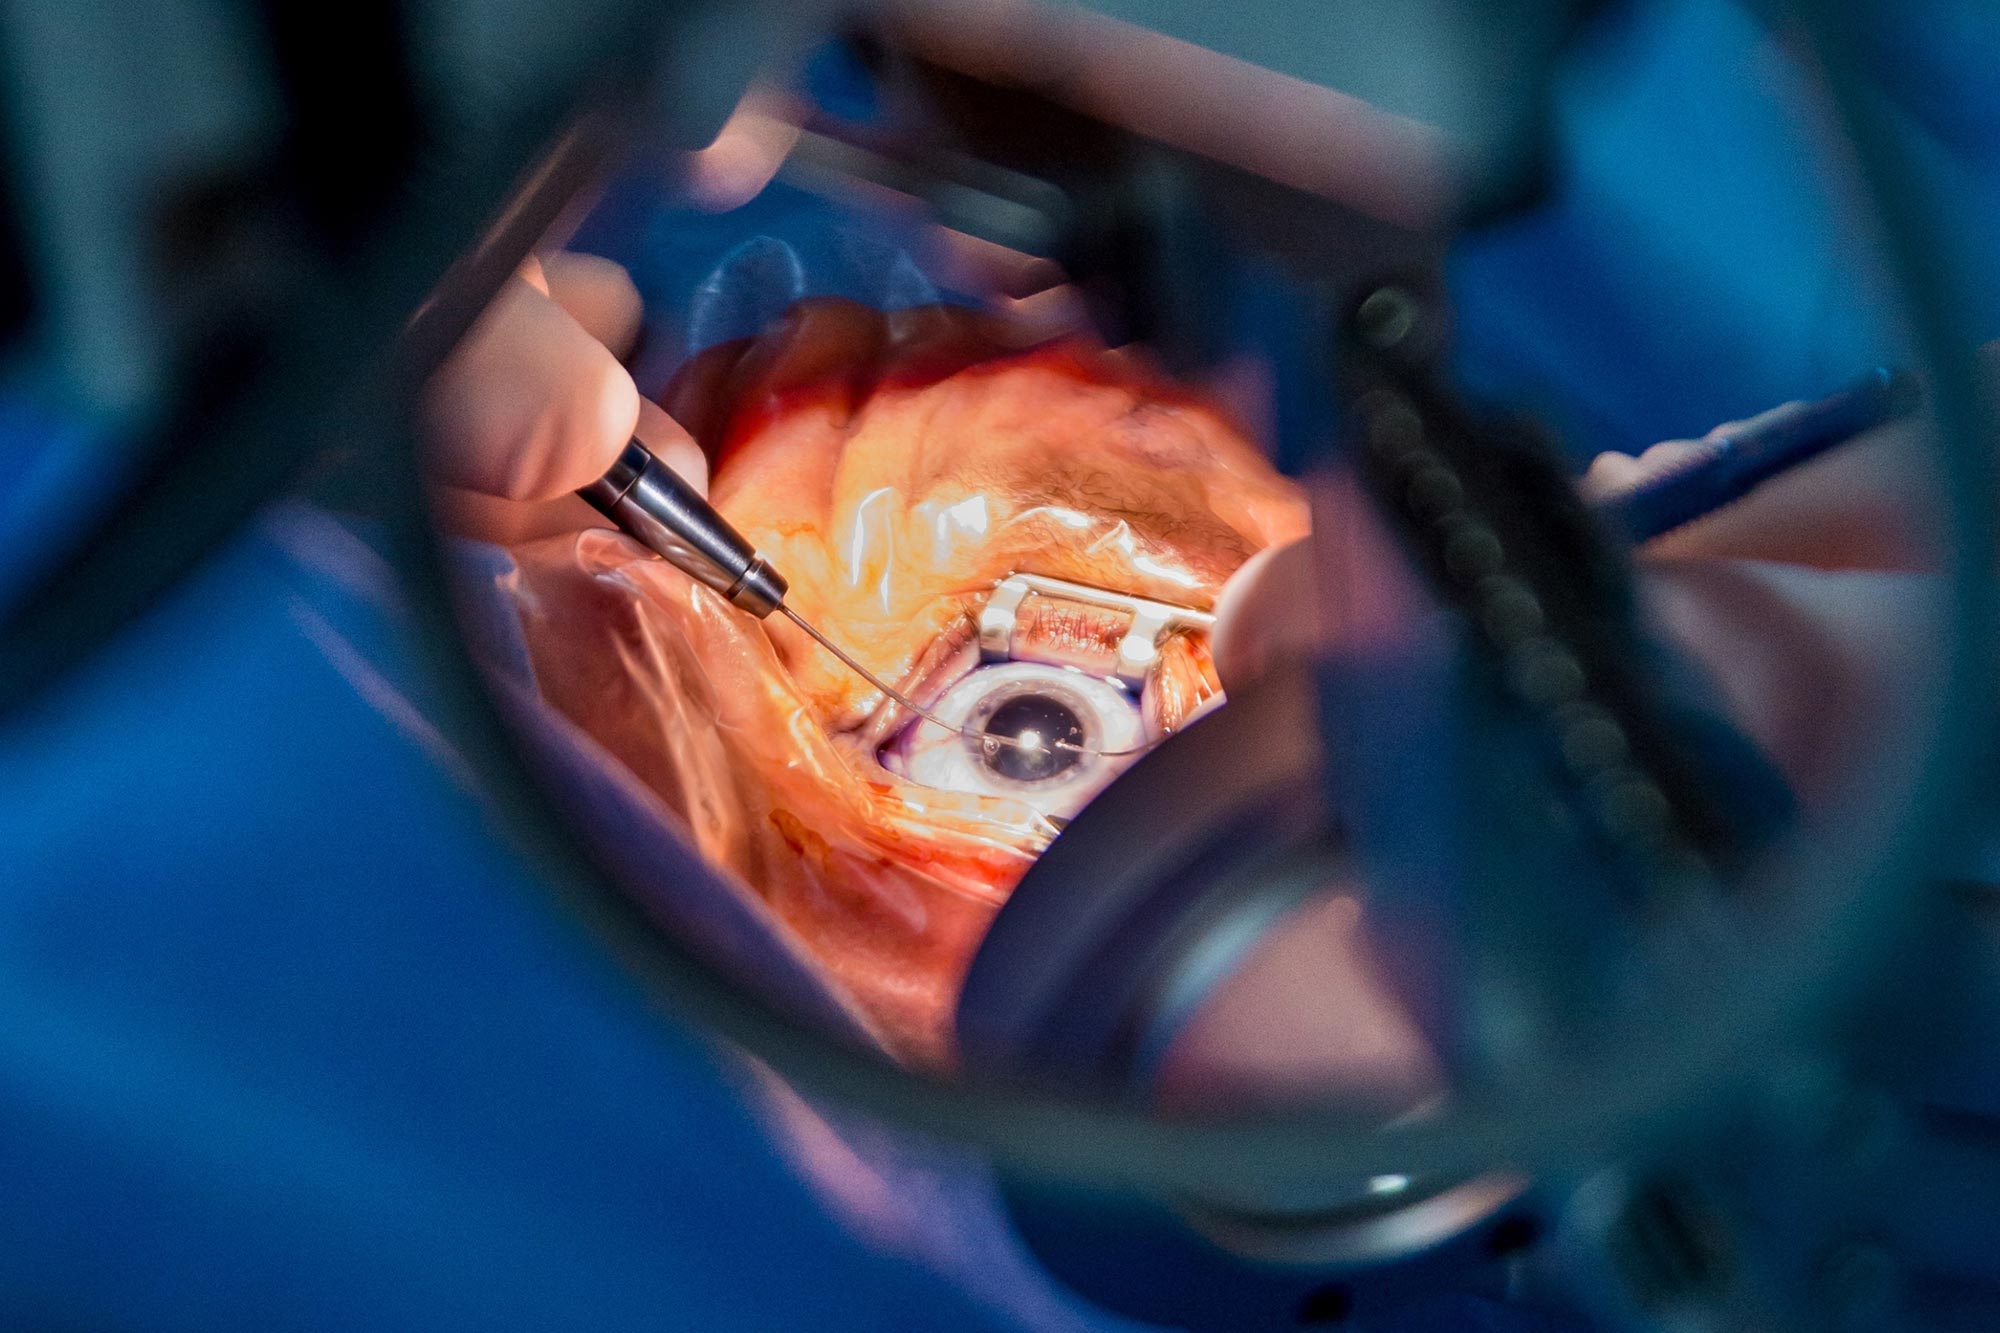 Cataract Surgery Linked With 30% Lower Risk of Dementia